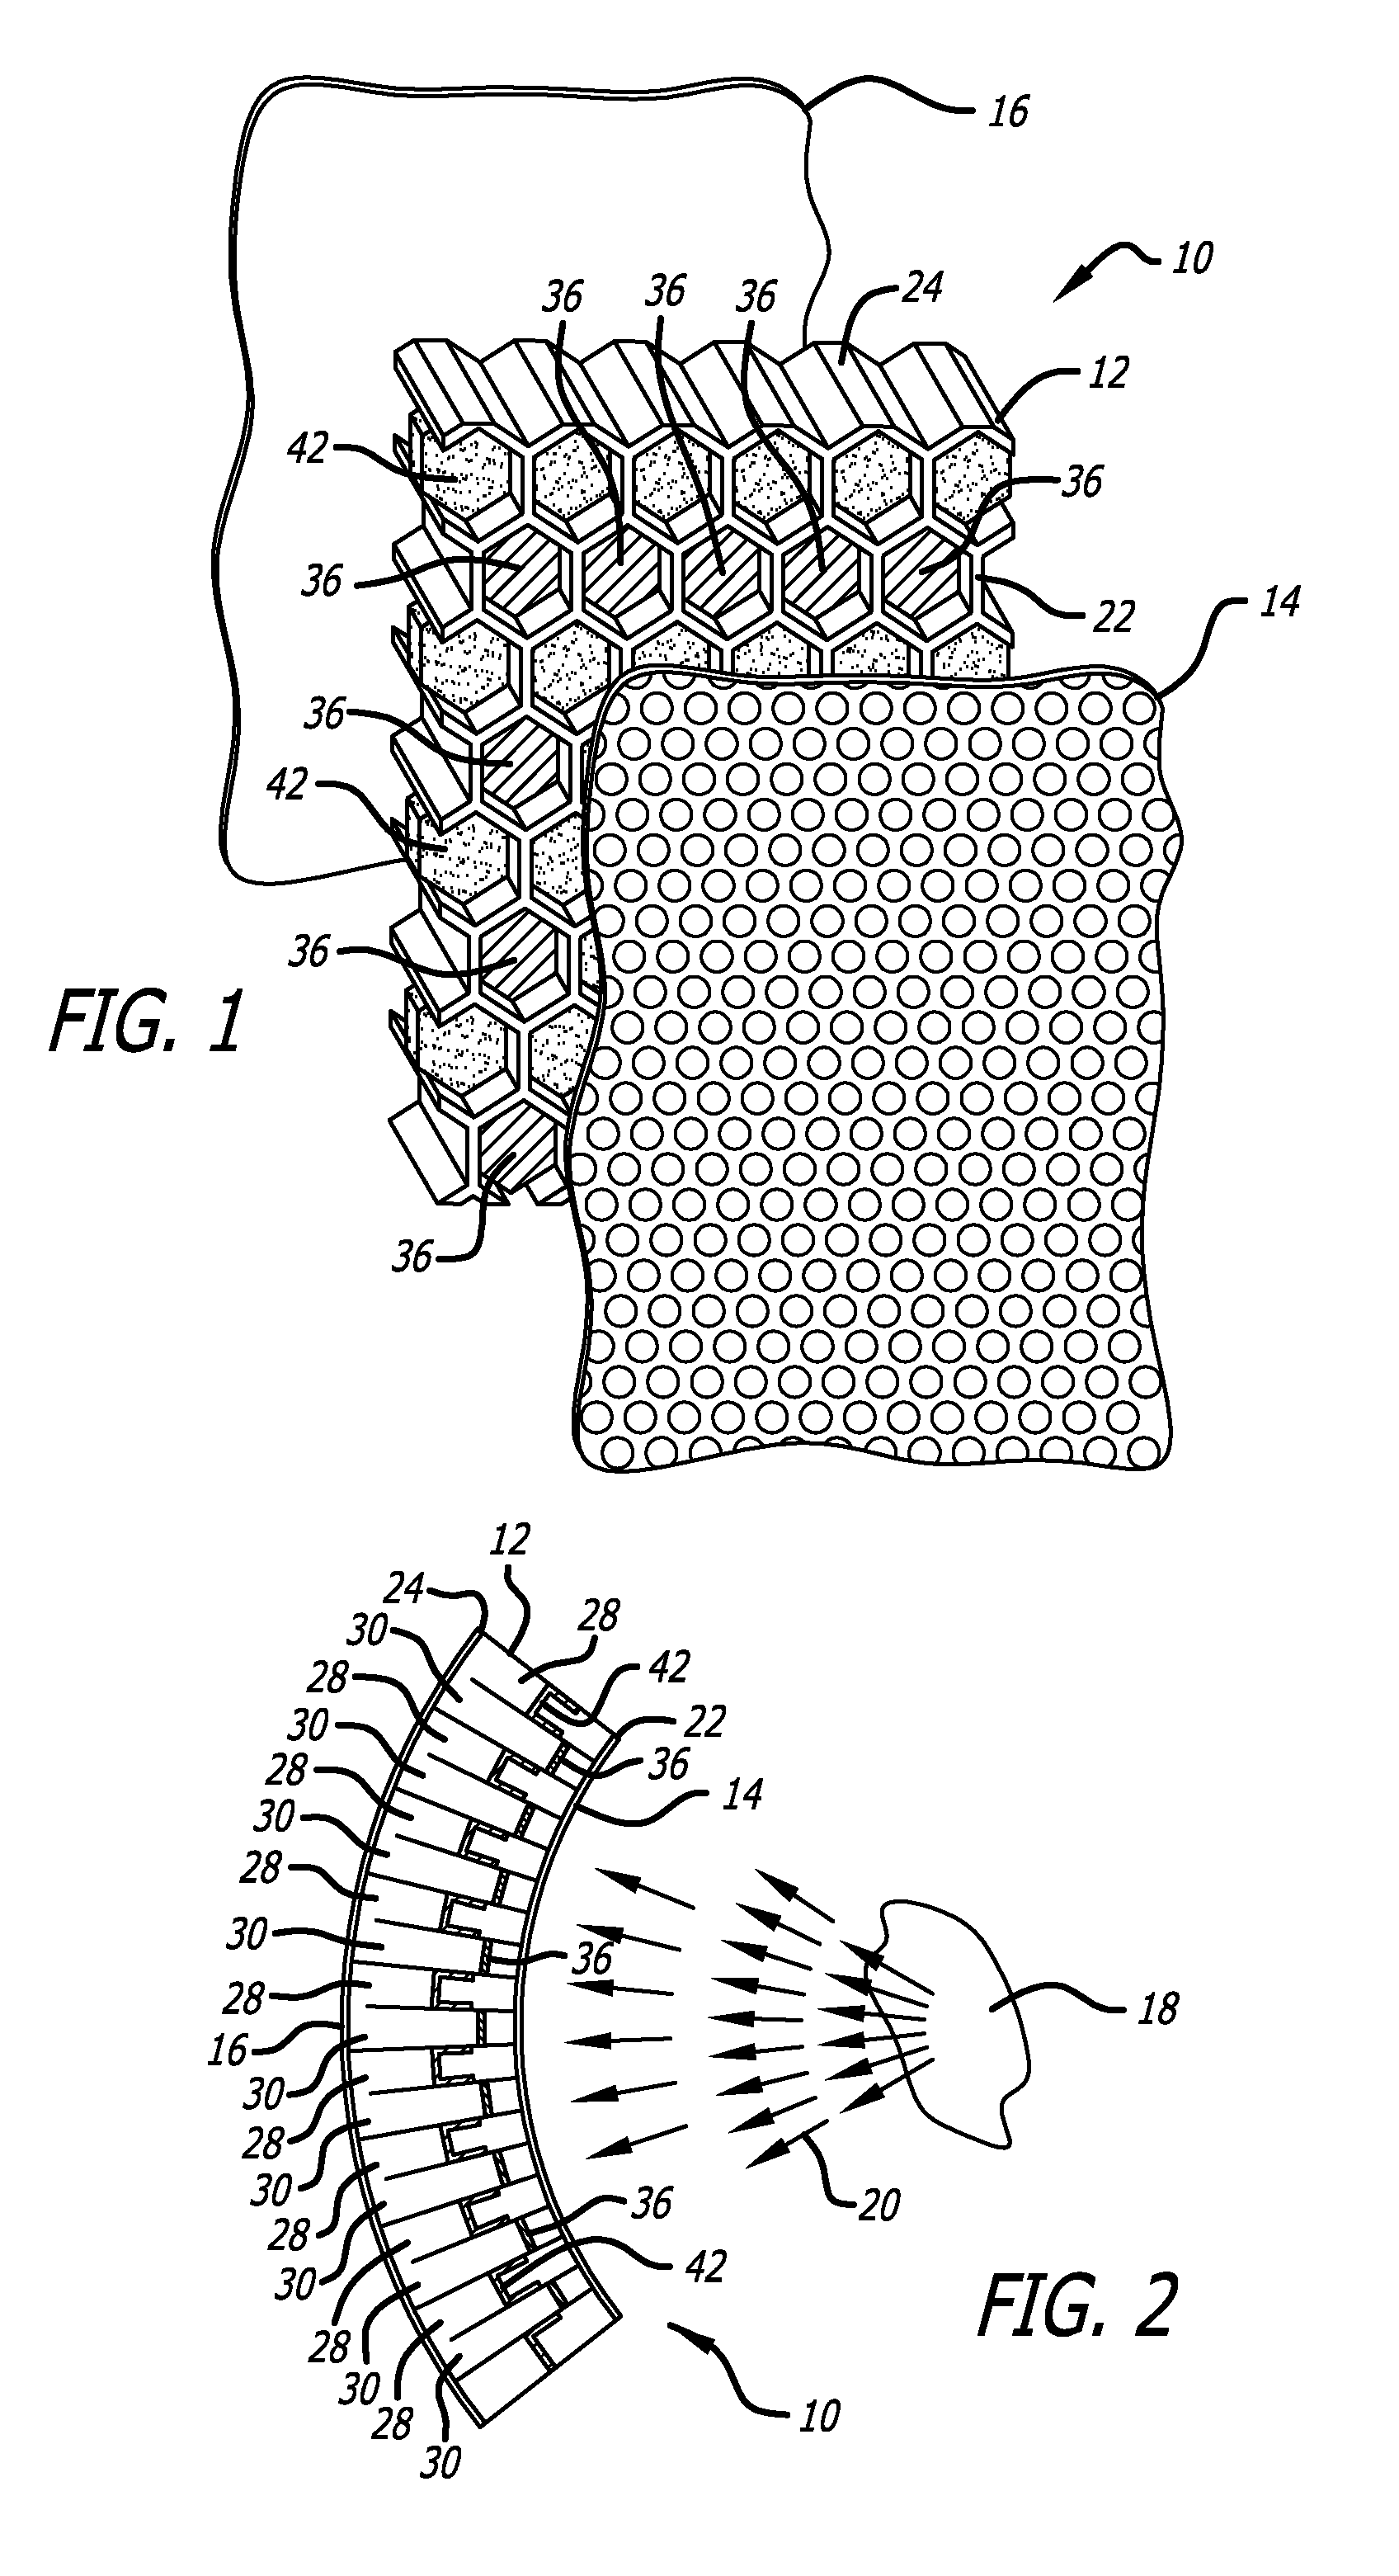 Acoustic structure with increased bandwidth suppression